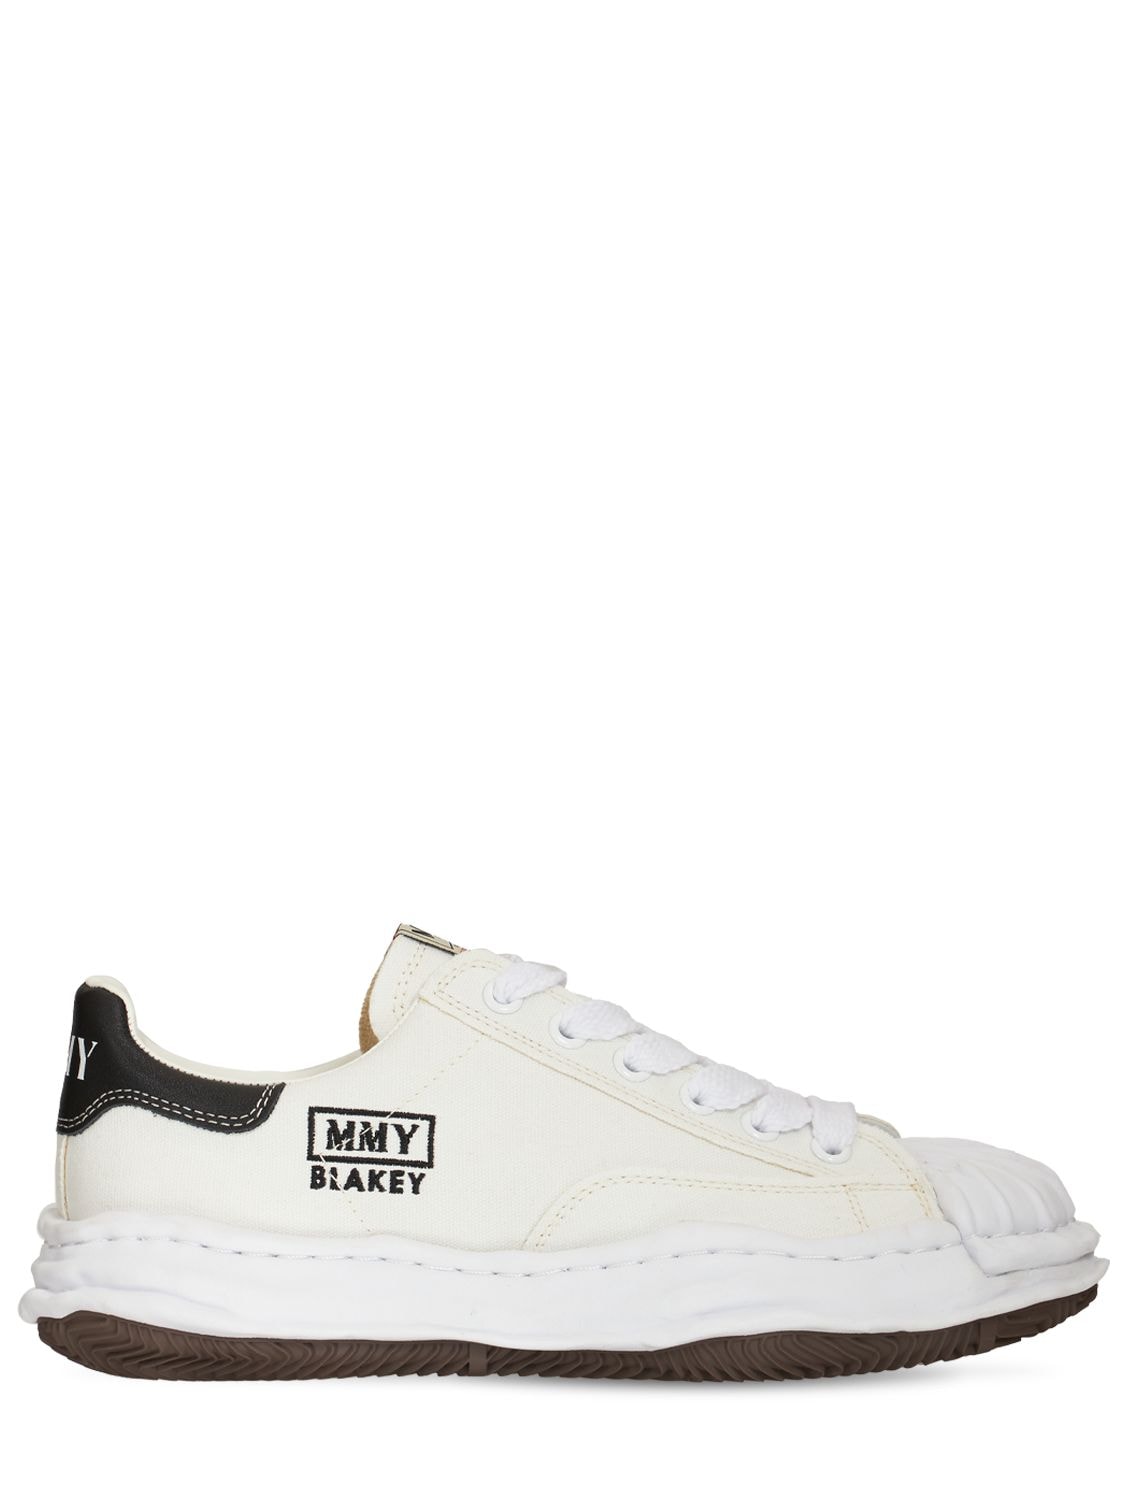 Image of Blakey Low Canvas Sneakers